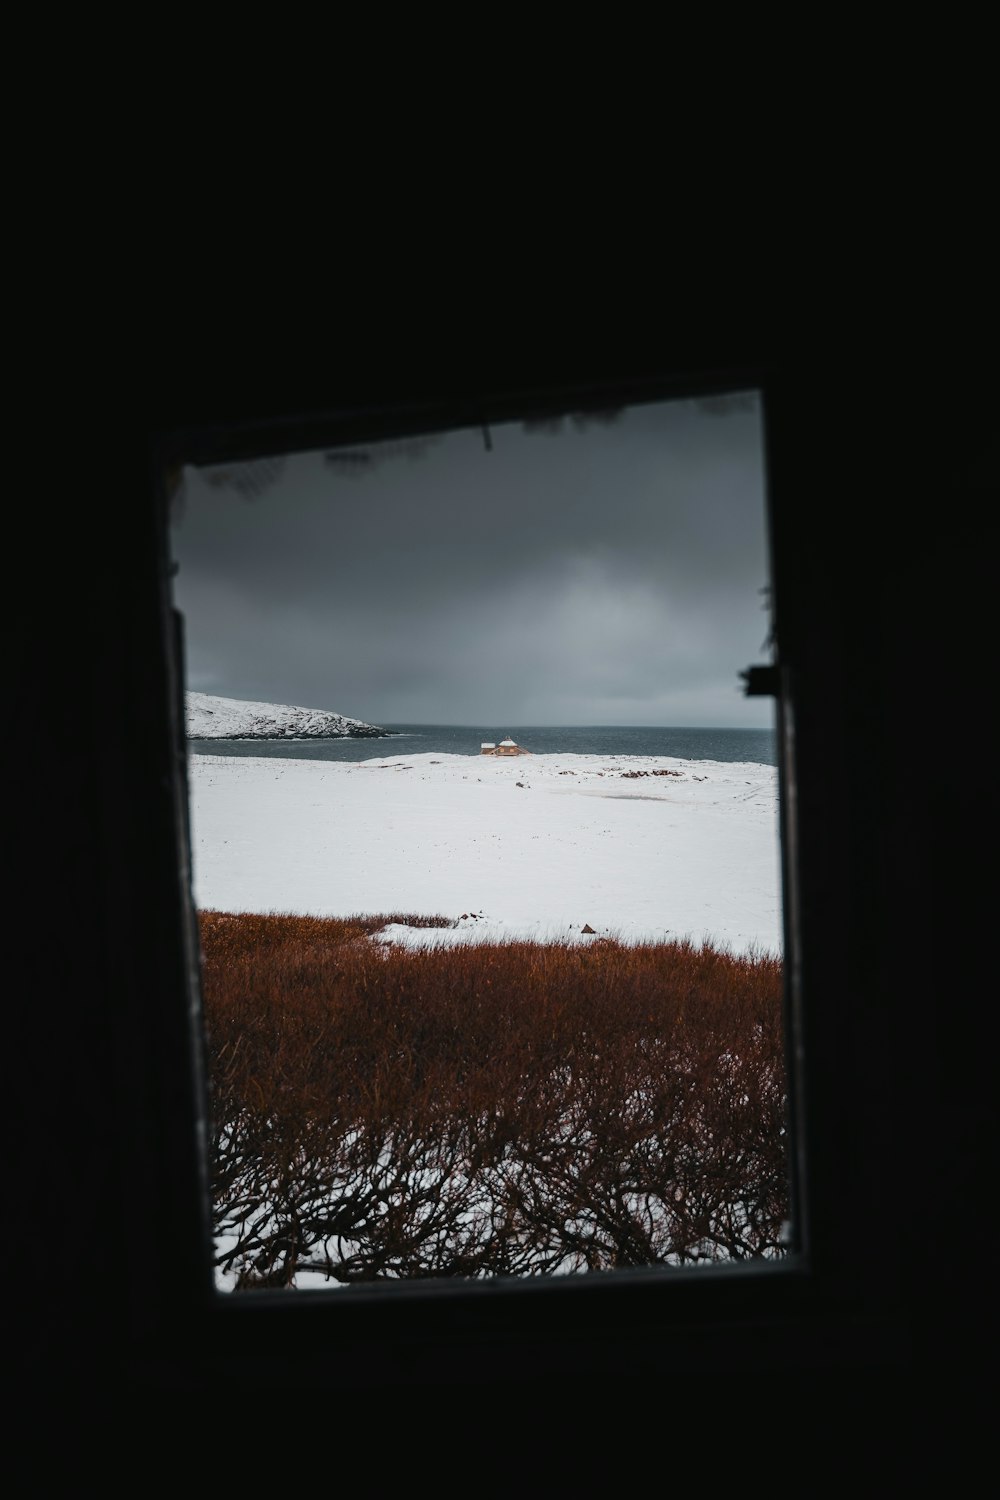 a view of a snowy field from a window